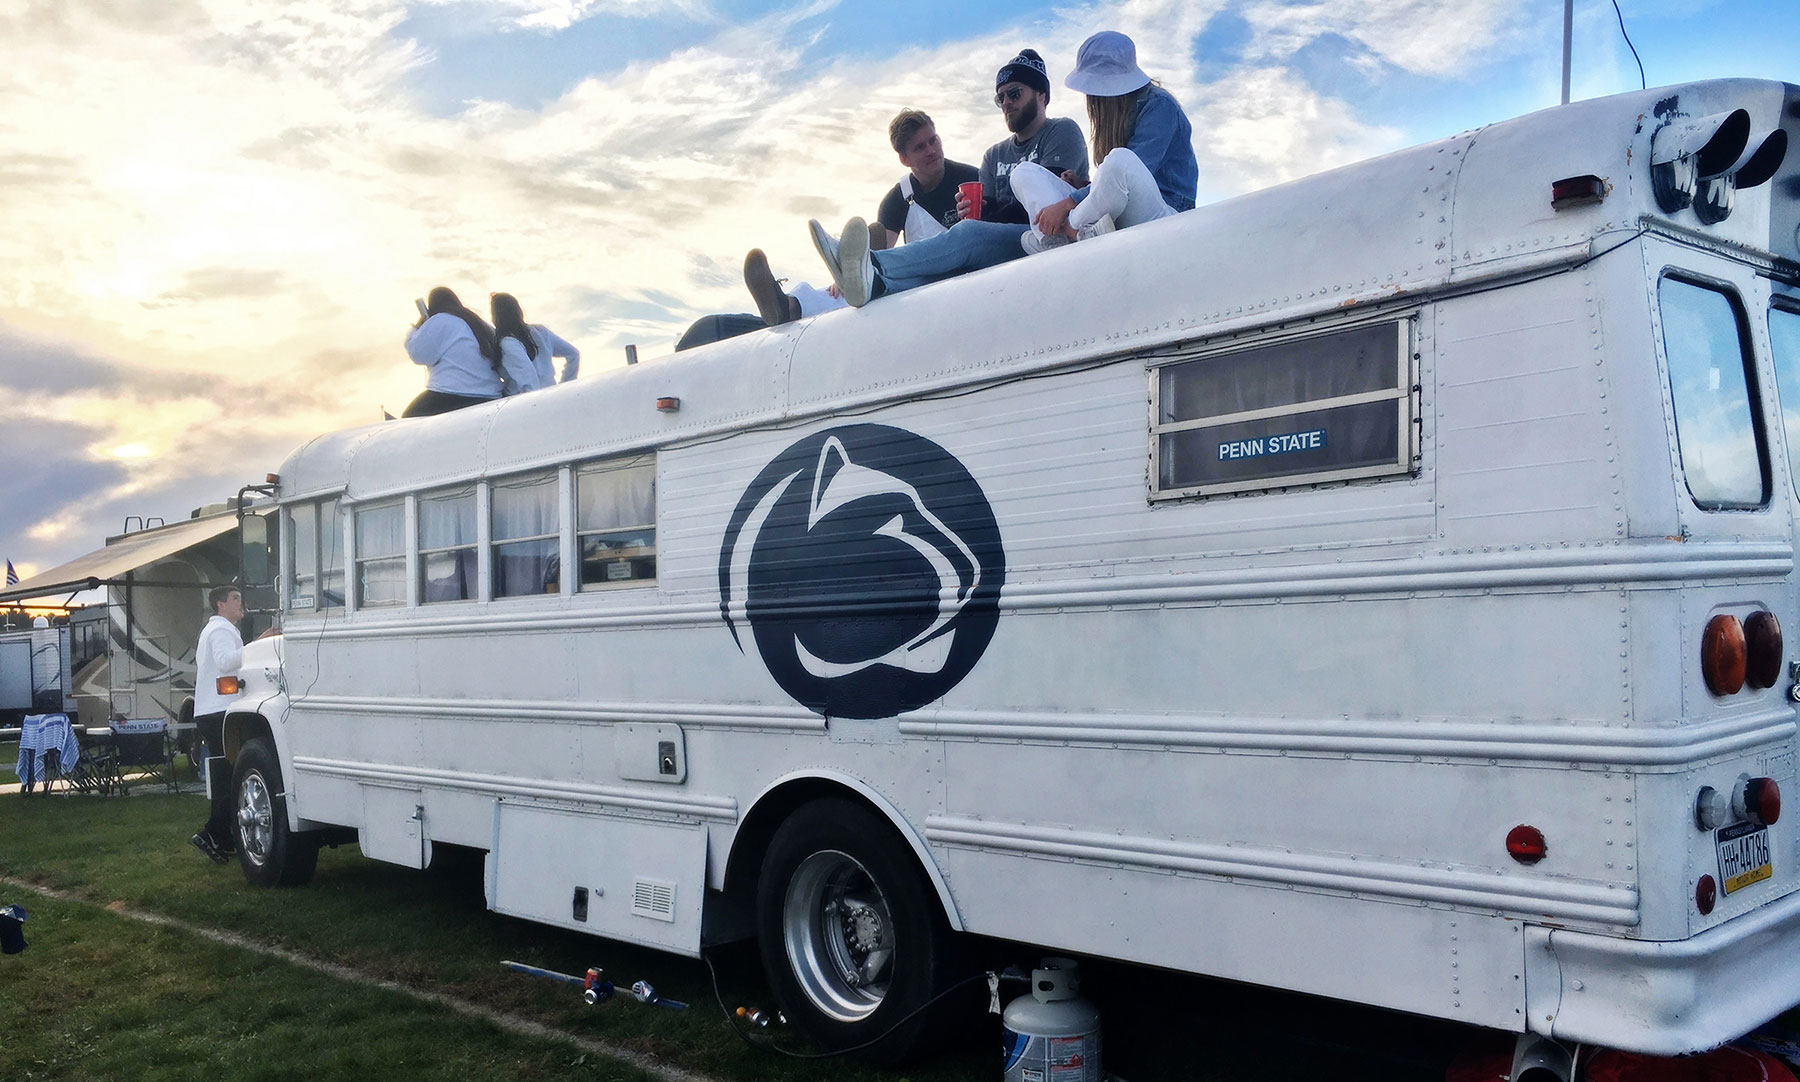 Several fans sitting on top of a white school bus with a big
Penn State logo on its side.